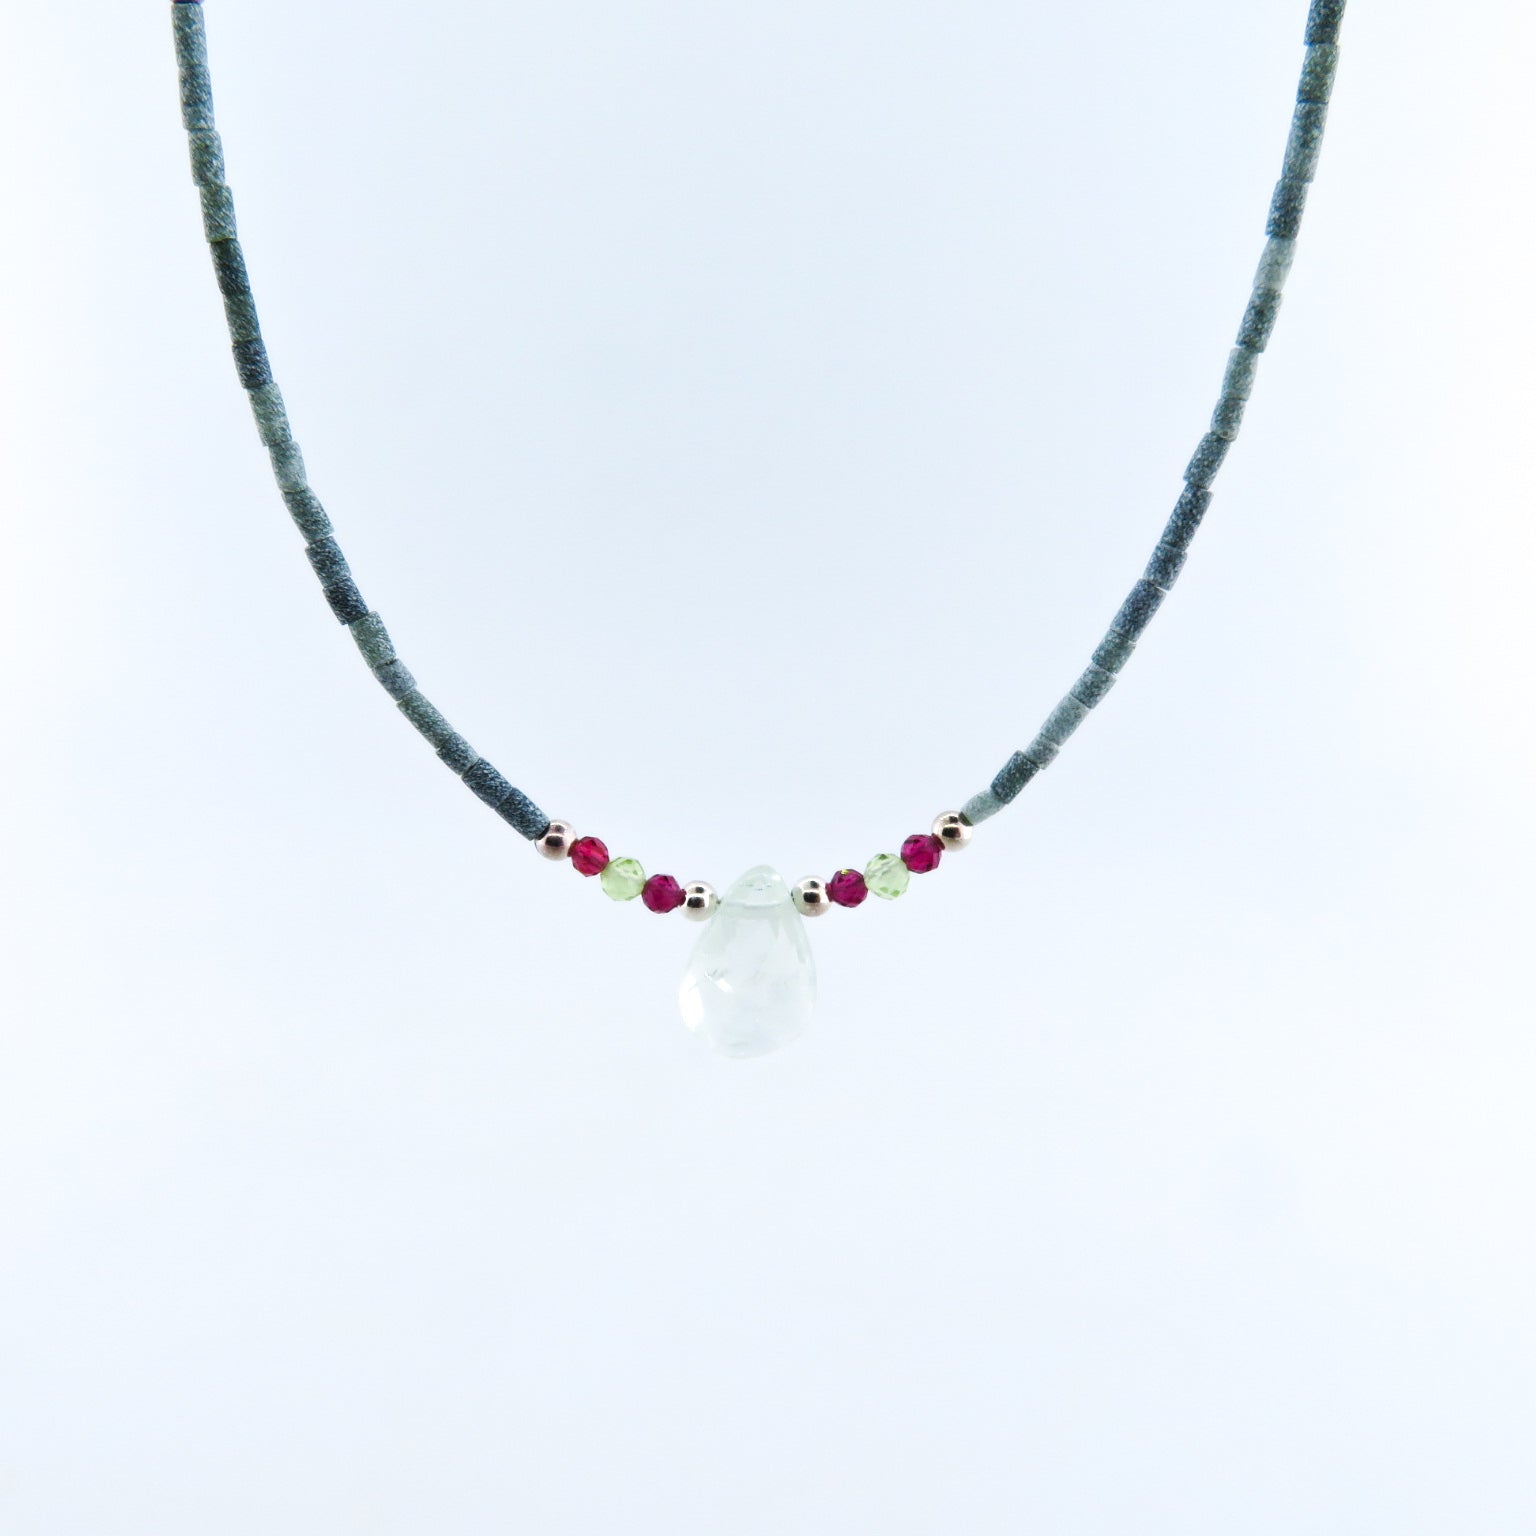 Jade Necklace with Blue Topaz, Garnet, Peridot and Silver Beads